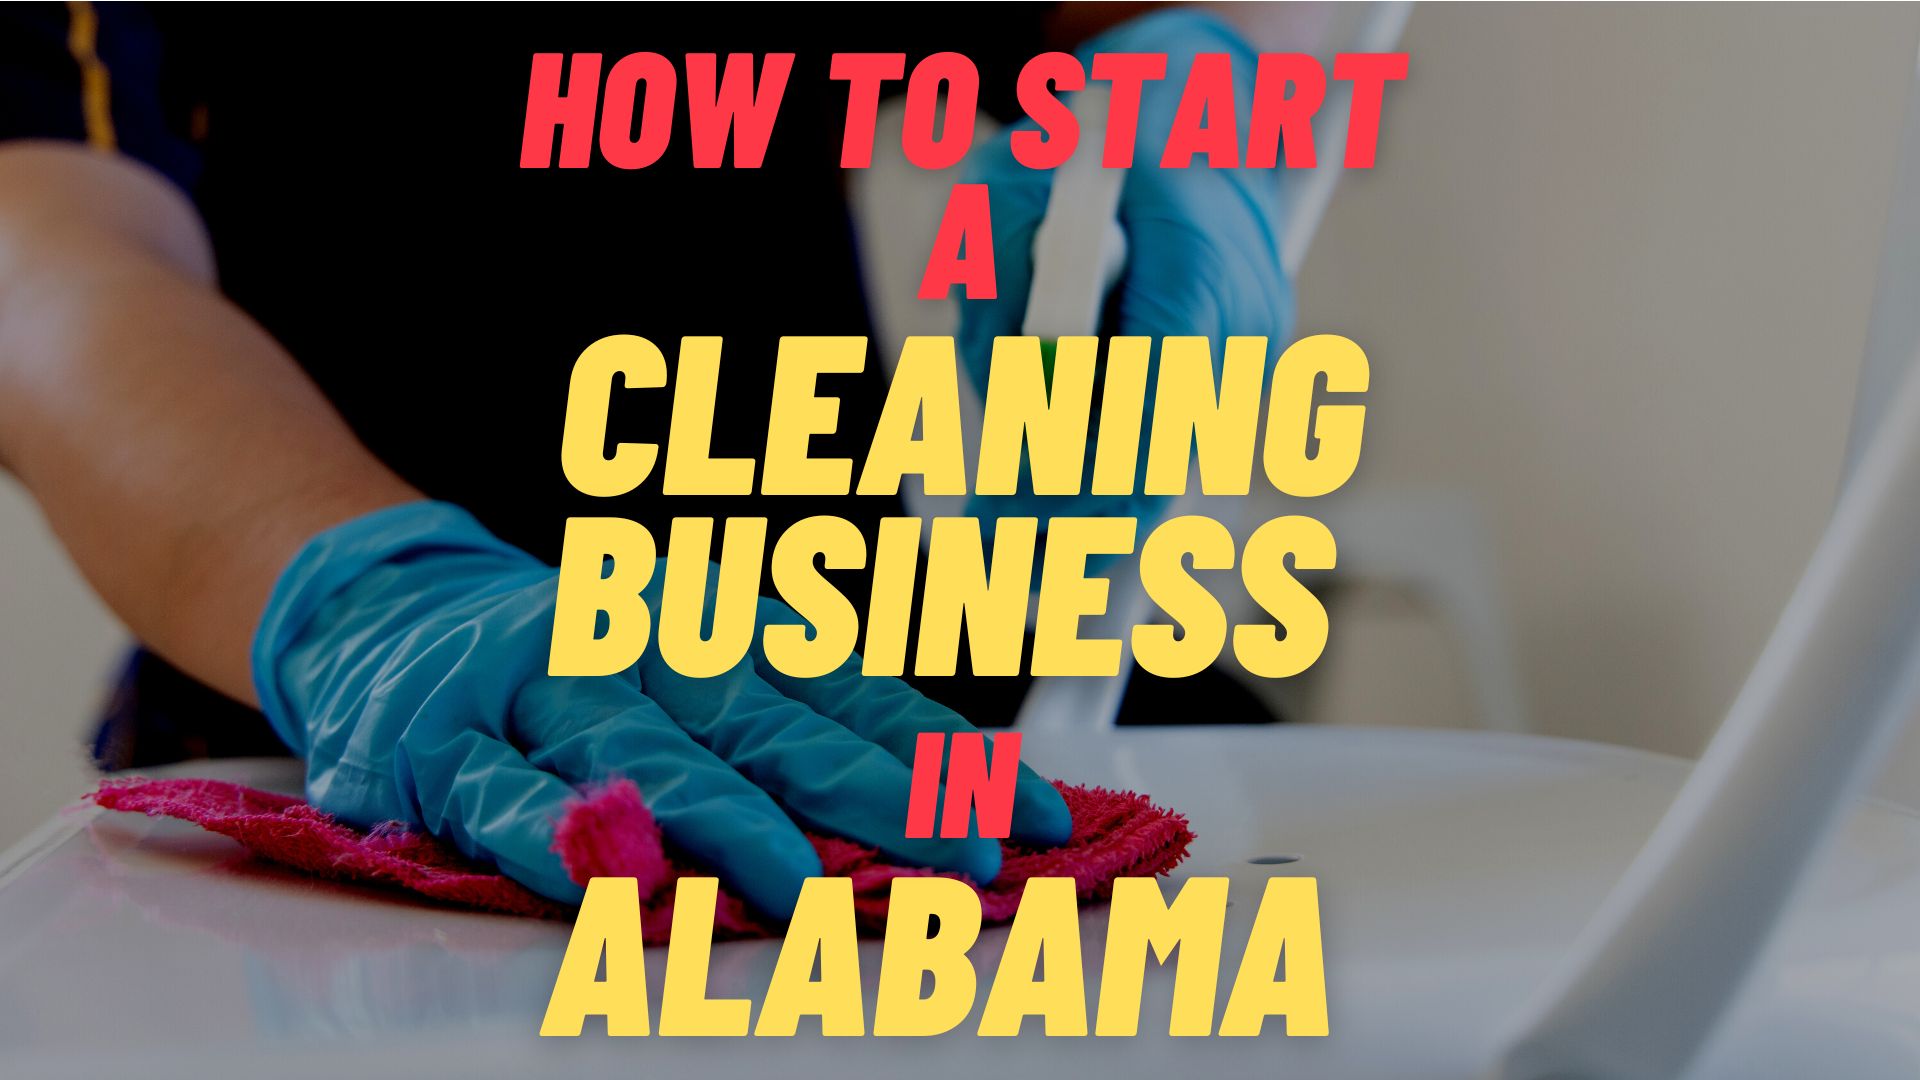 Start a Cleaning Business in Alabama